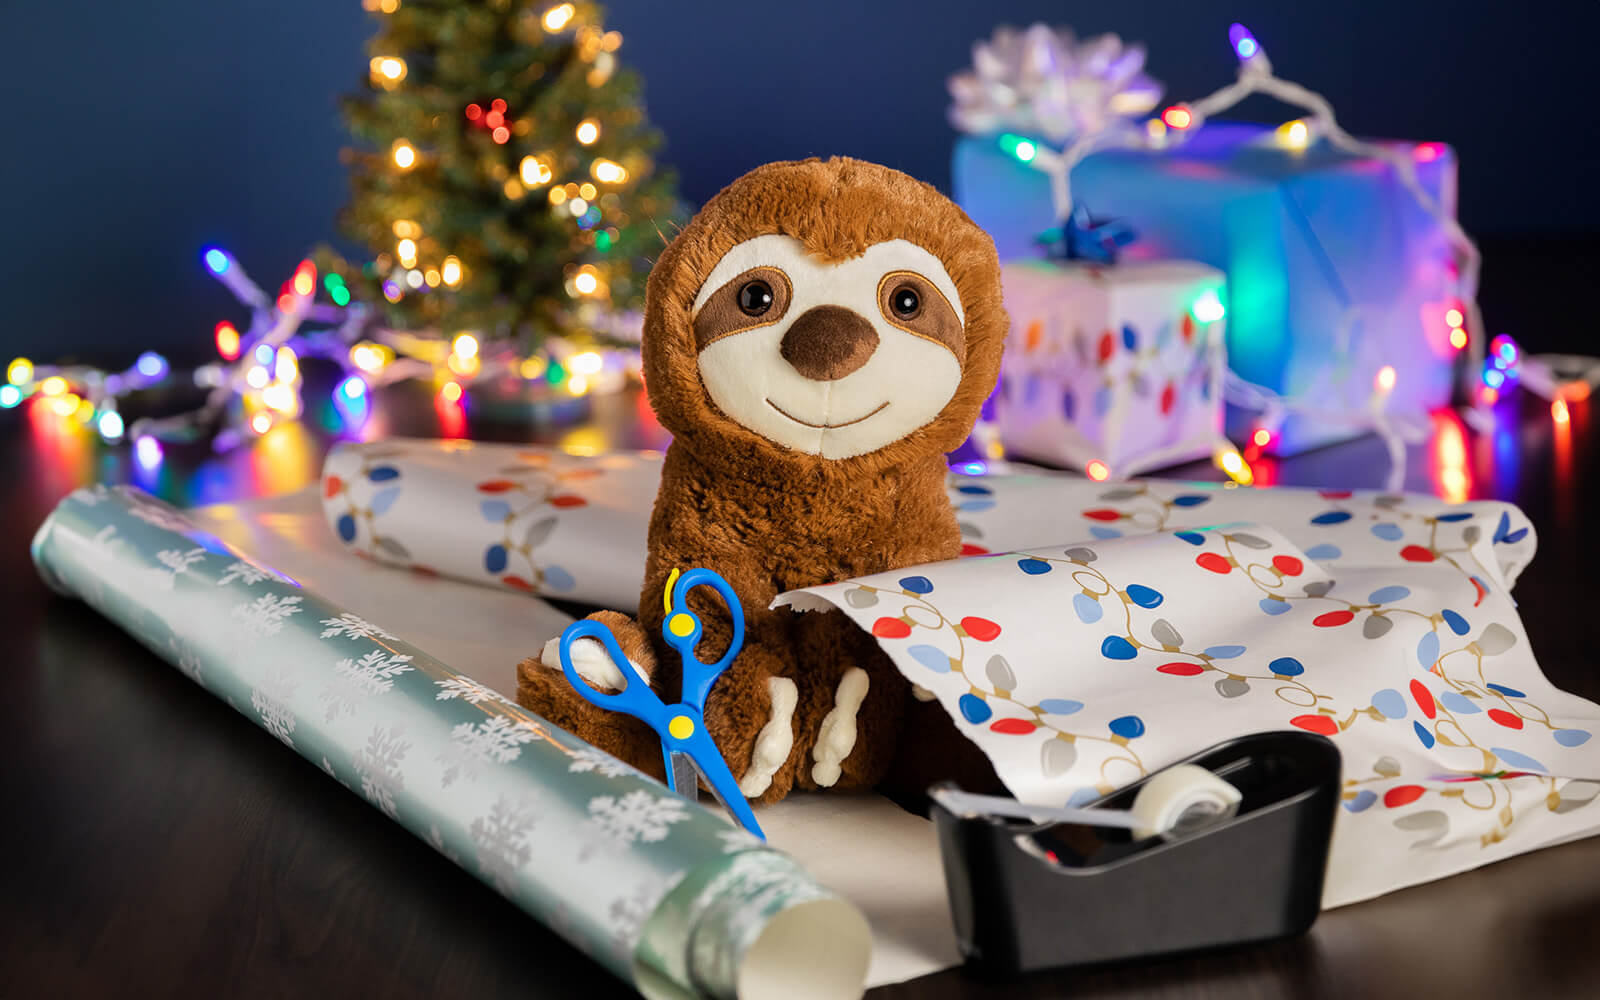 An image of Sam the Sloth with wrapping paper, scissors, tape. In the background is a present, Christmas lights, and a Christmas tree